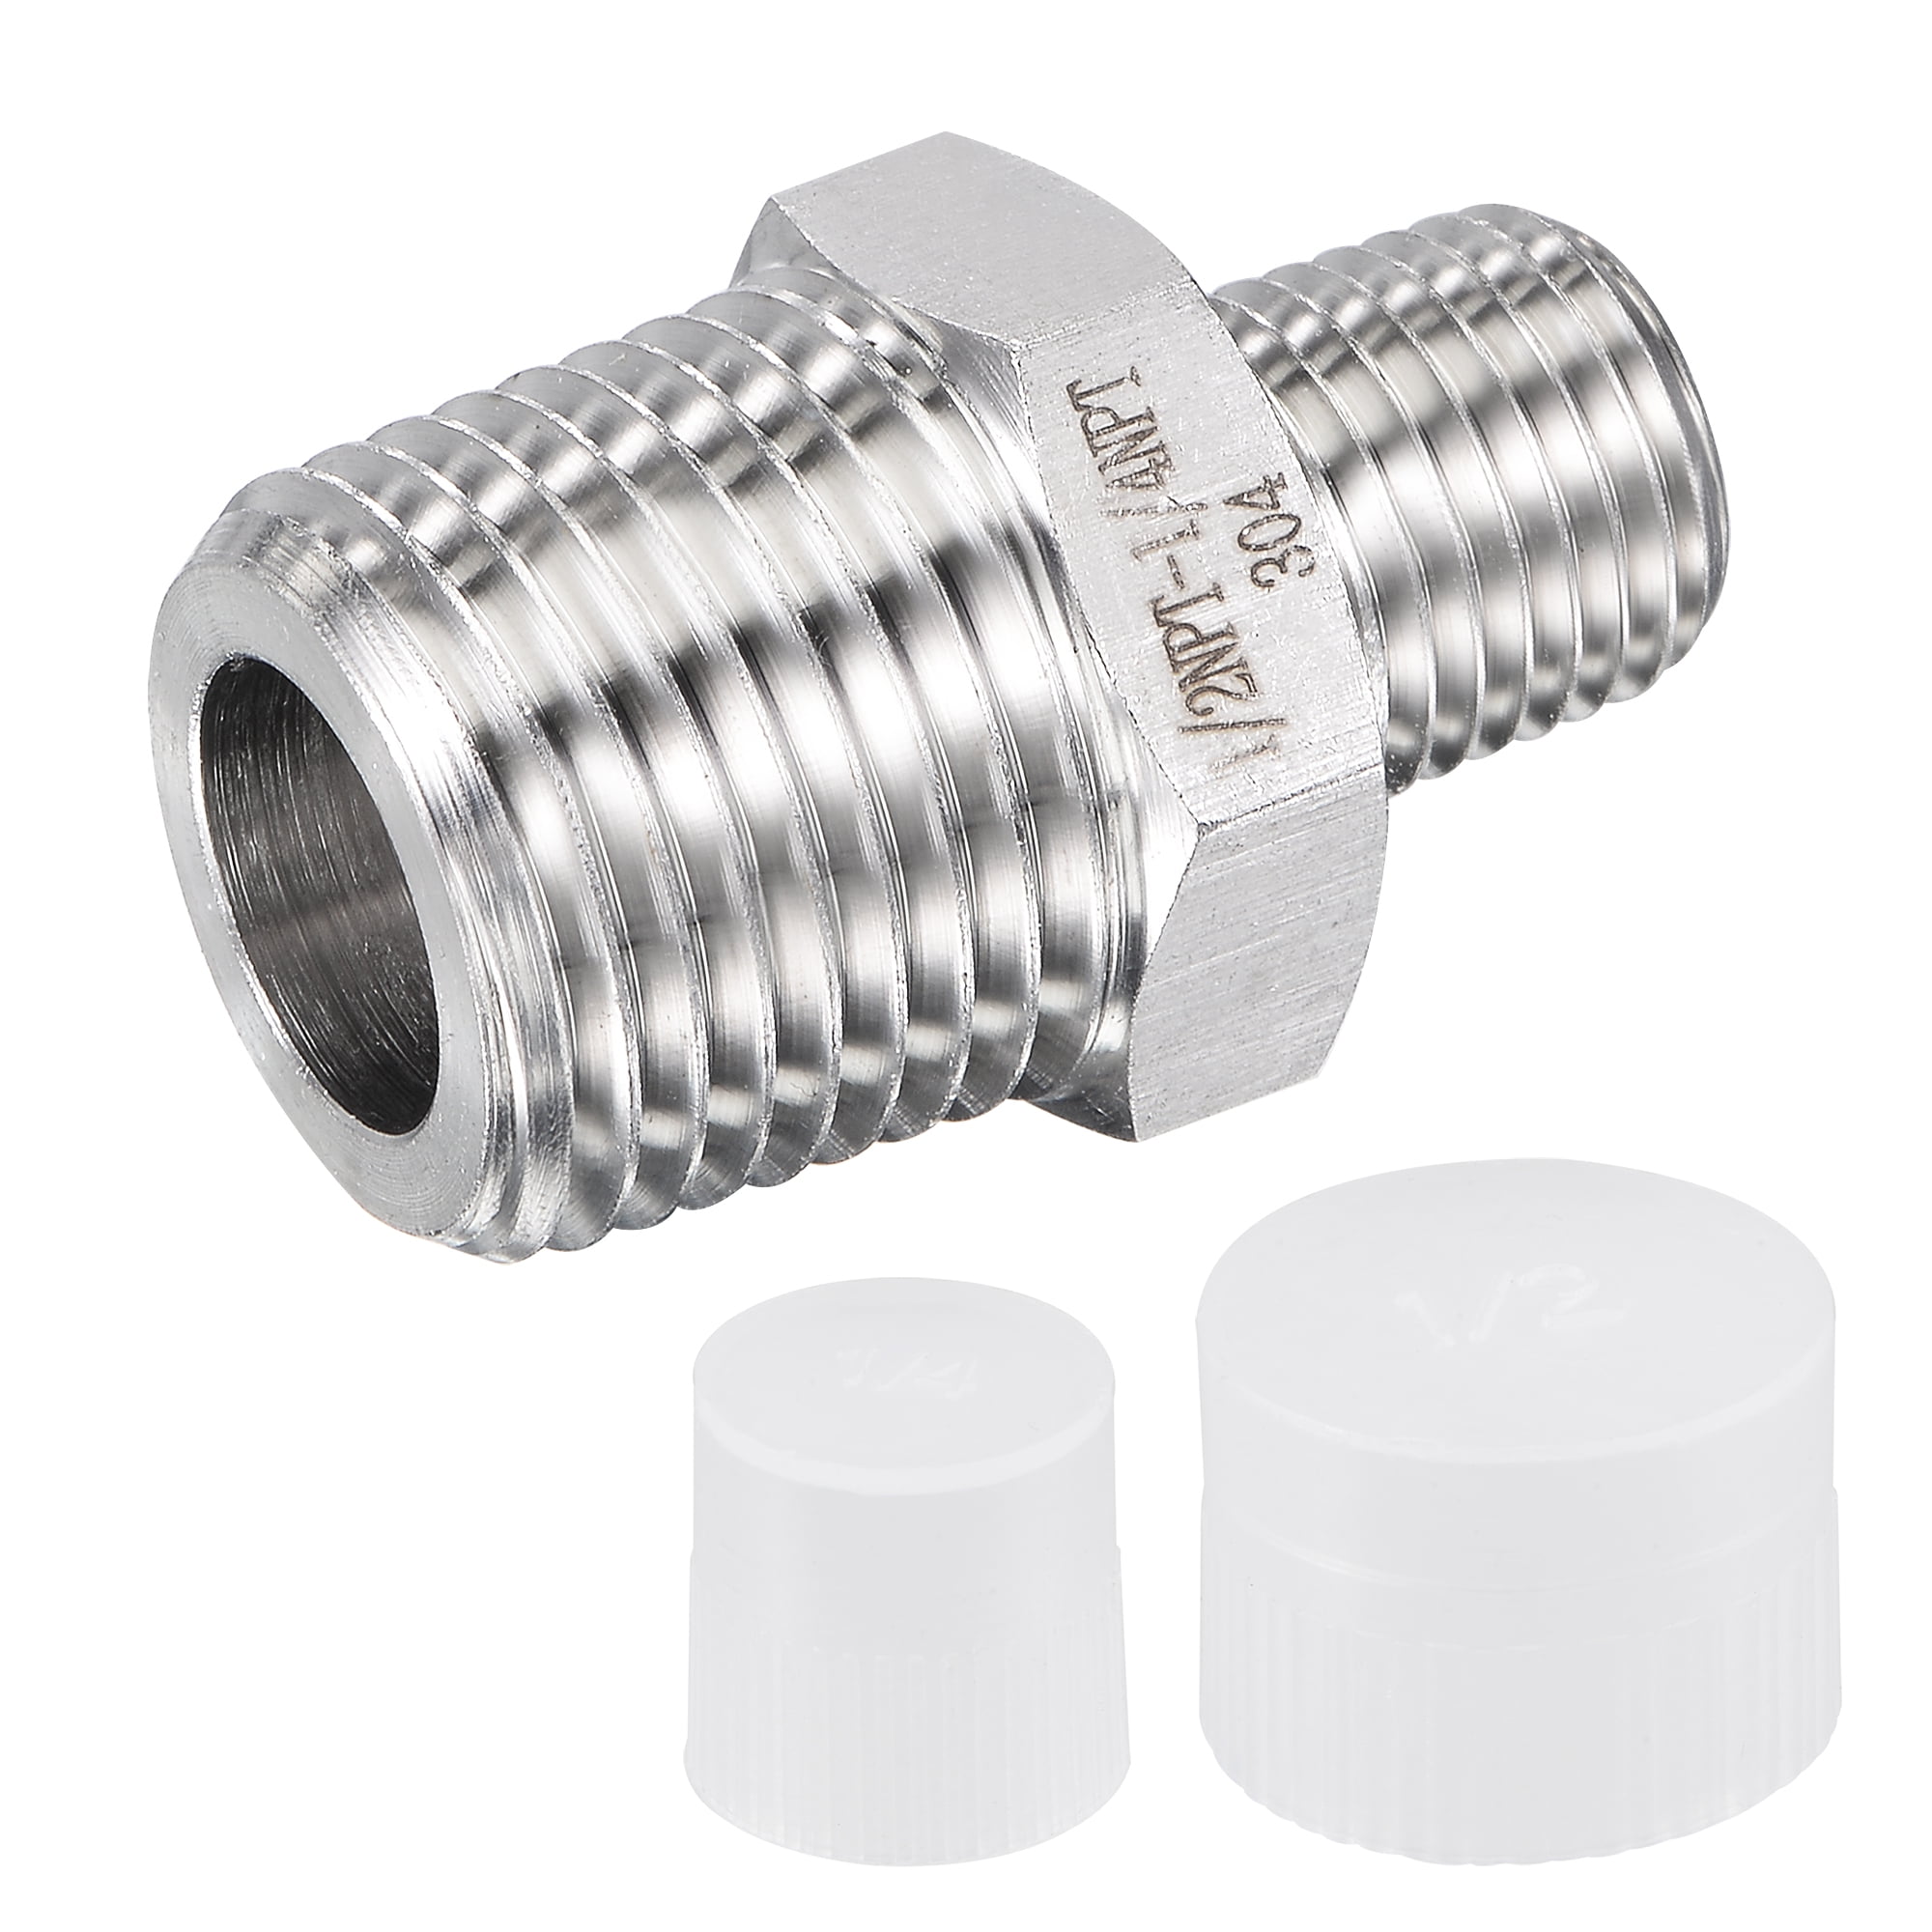 1" Male x 3/4" Female NPT Threaded Hex Reducer Bushing Stainless Steel 304 SUS 